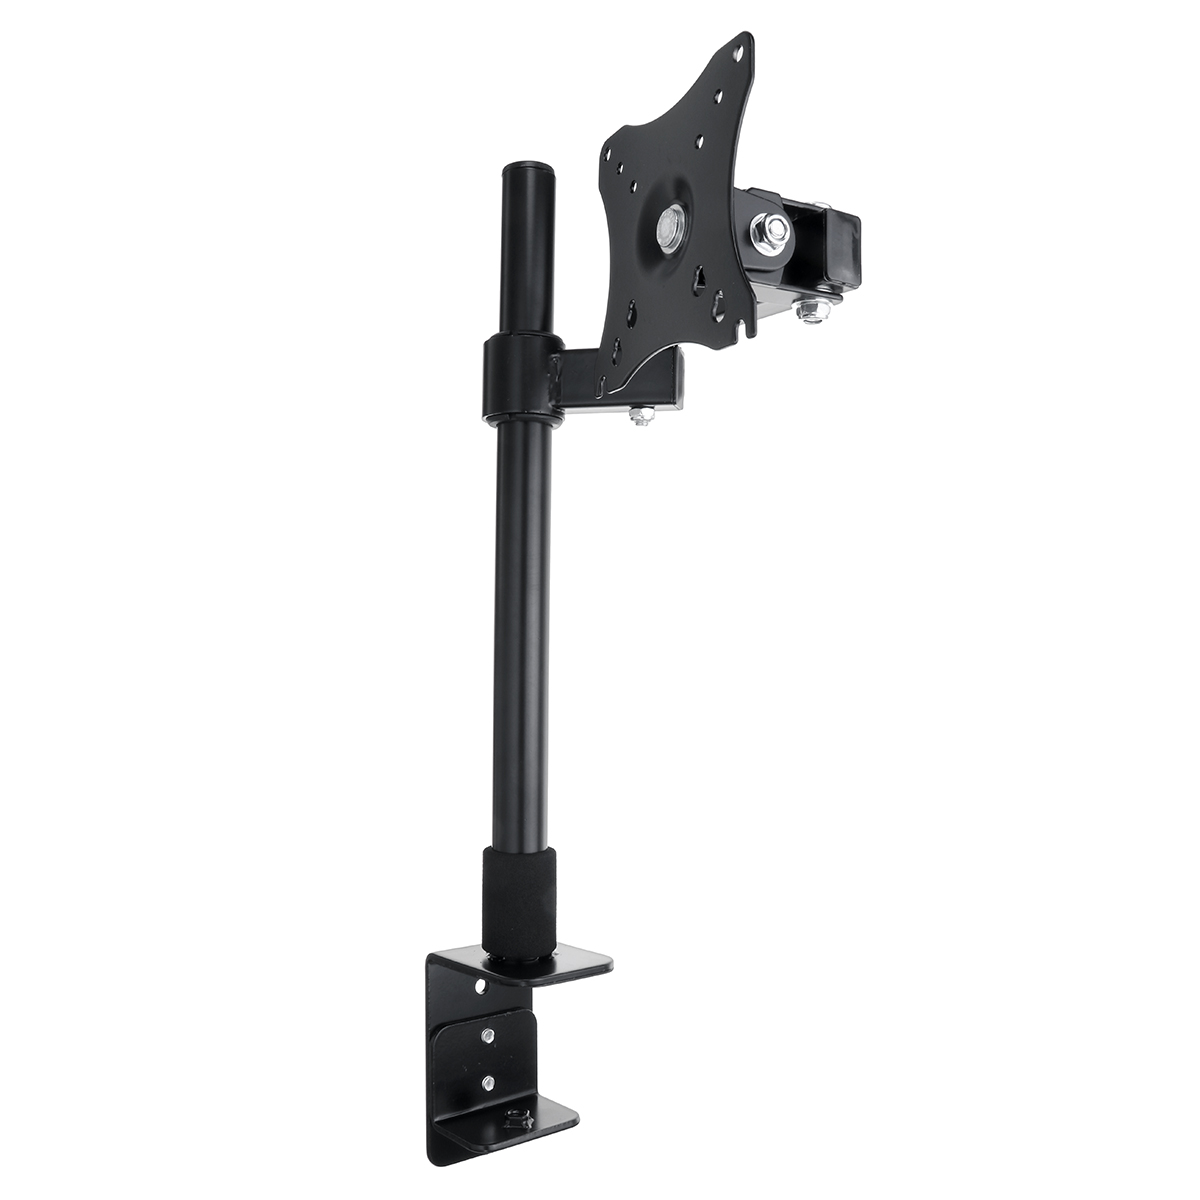 Single-Arm-Desk-Mount-LCD-Computer-Monitor-Bracket-Clamp-Stand-14-27-inch-Screen-TV-Bracket-1900409-5